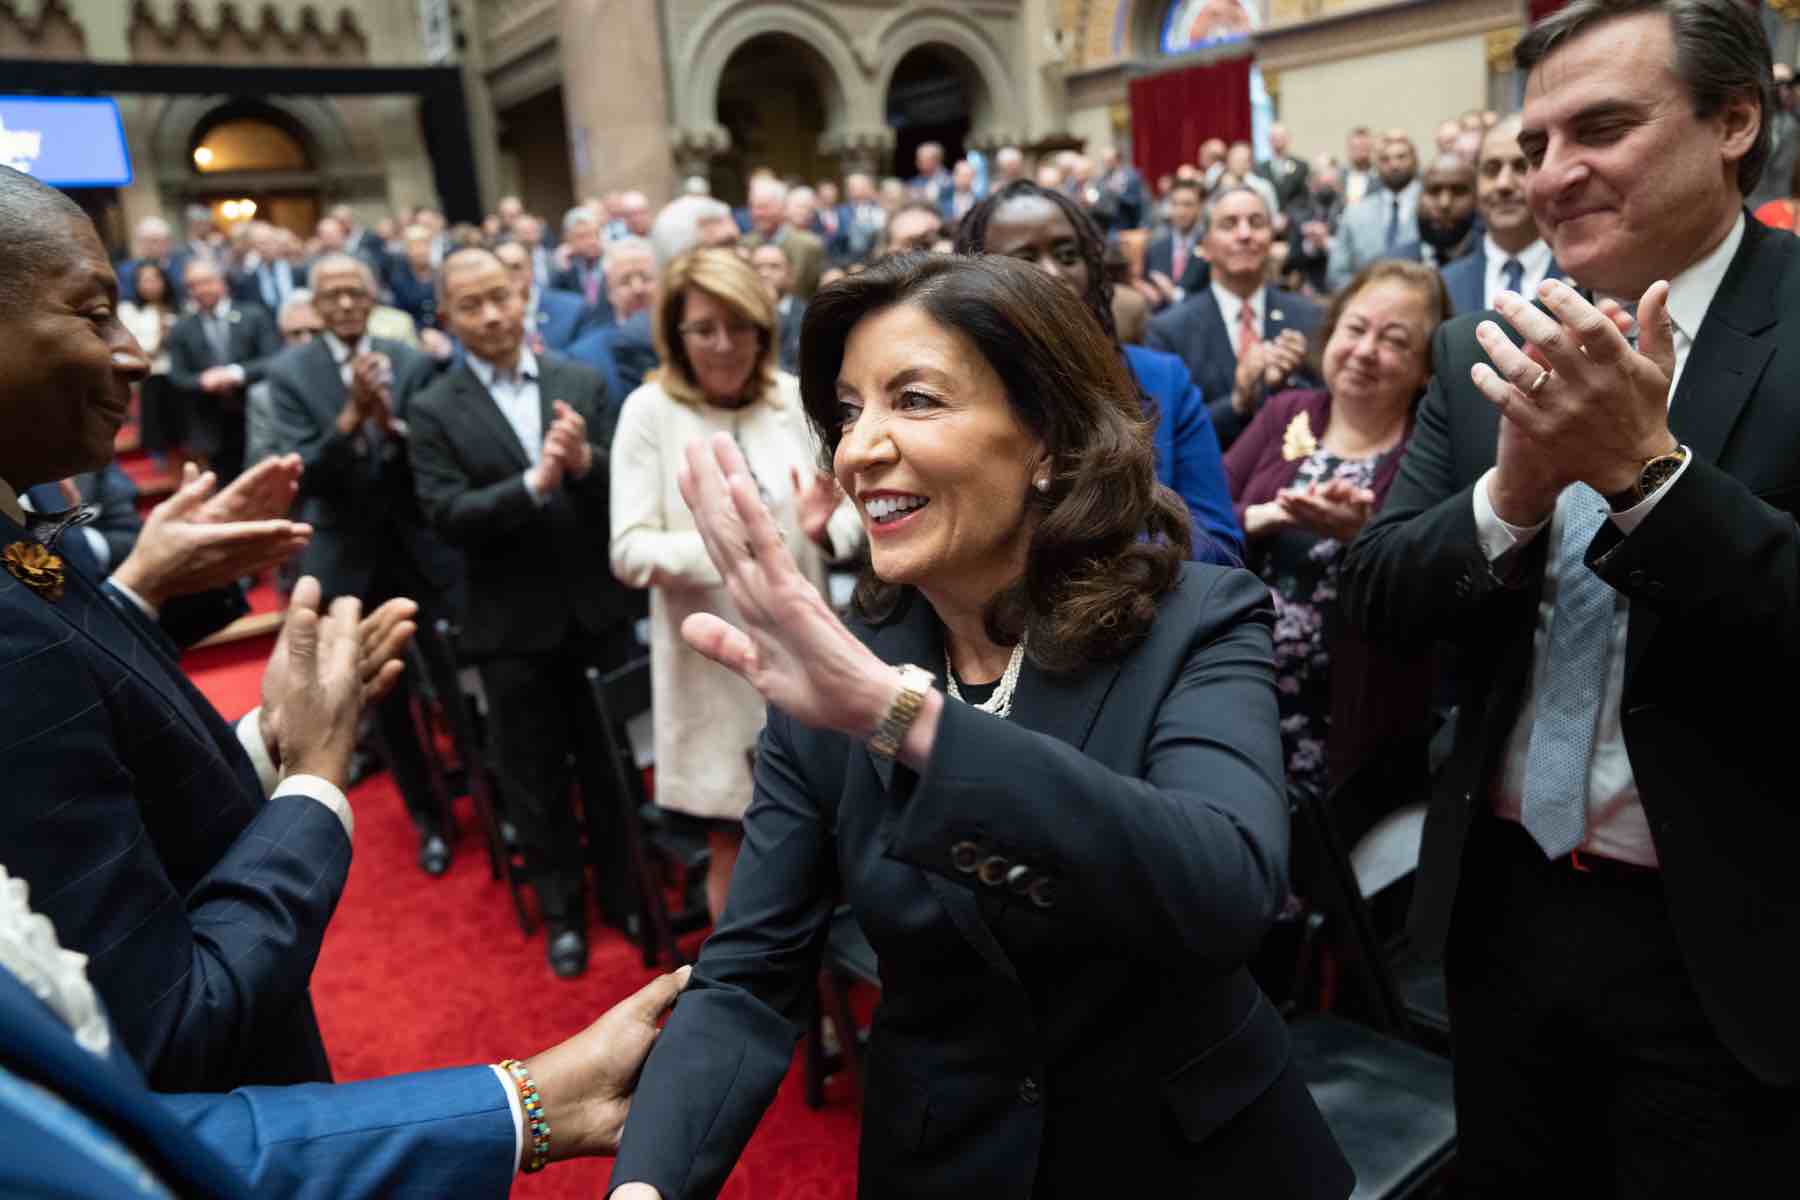 Governor Hochul surrounded by applauding lawmakers.